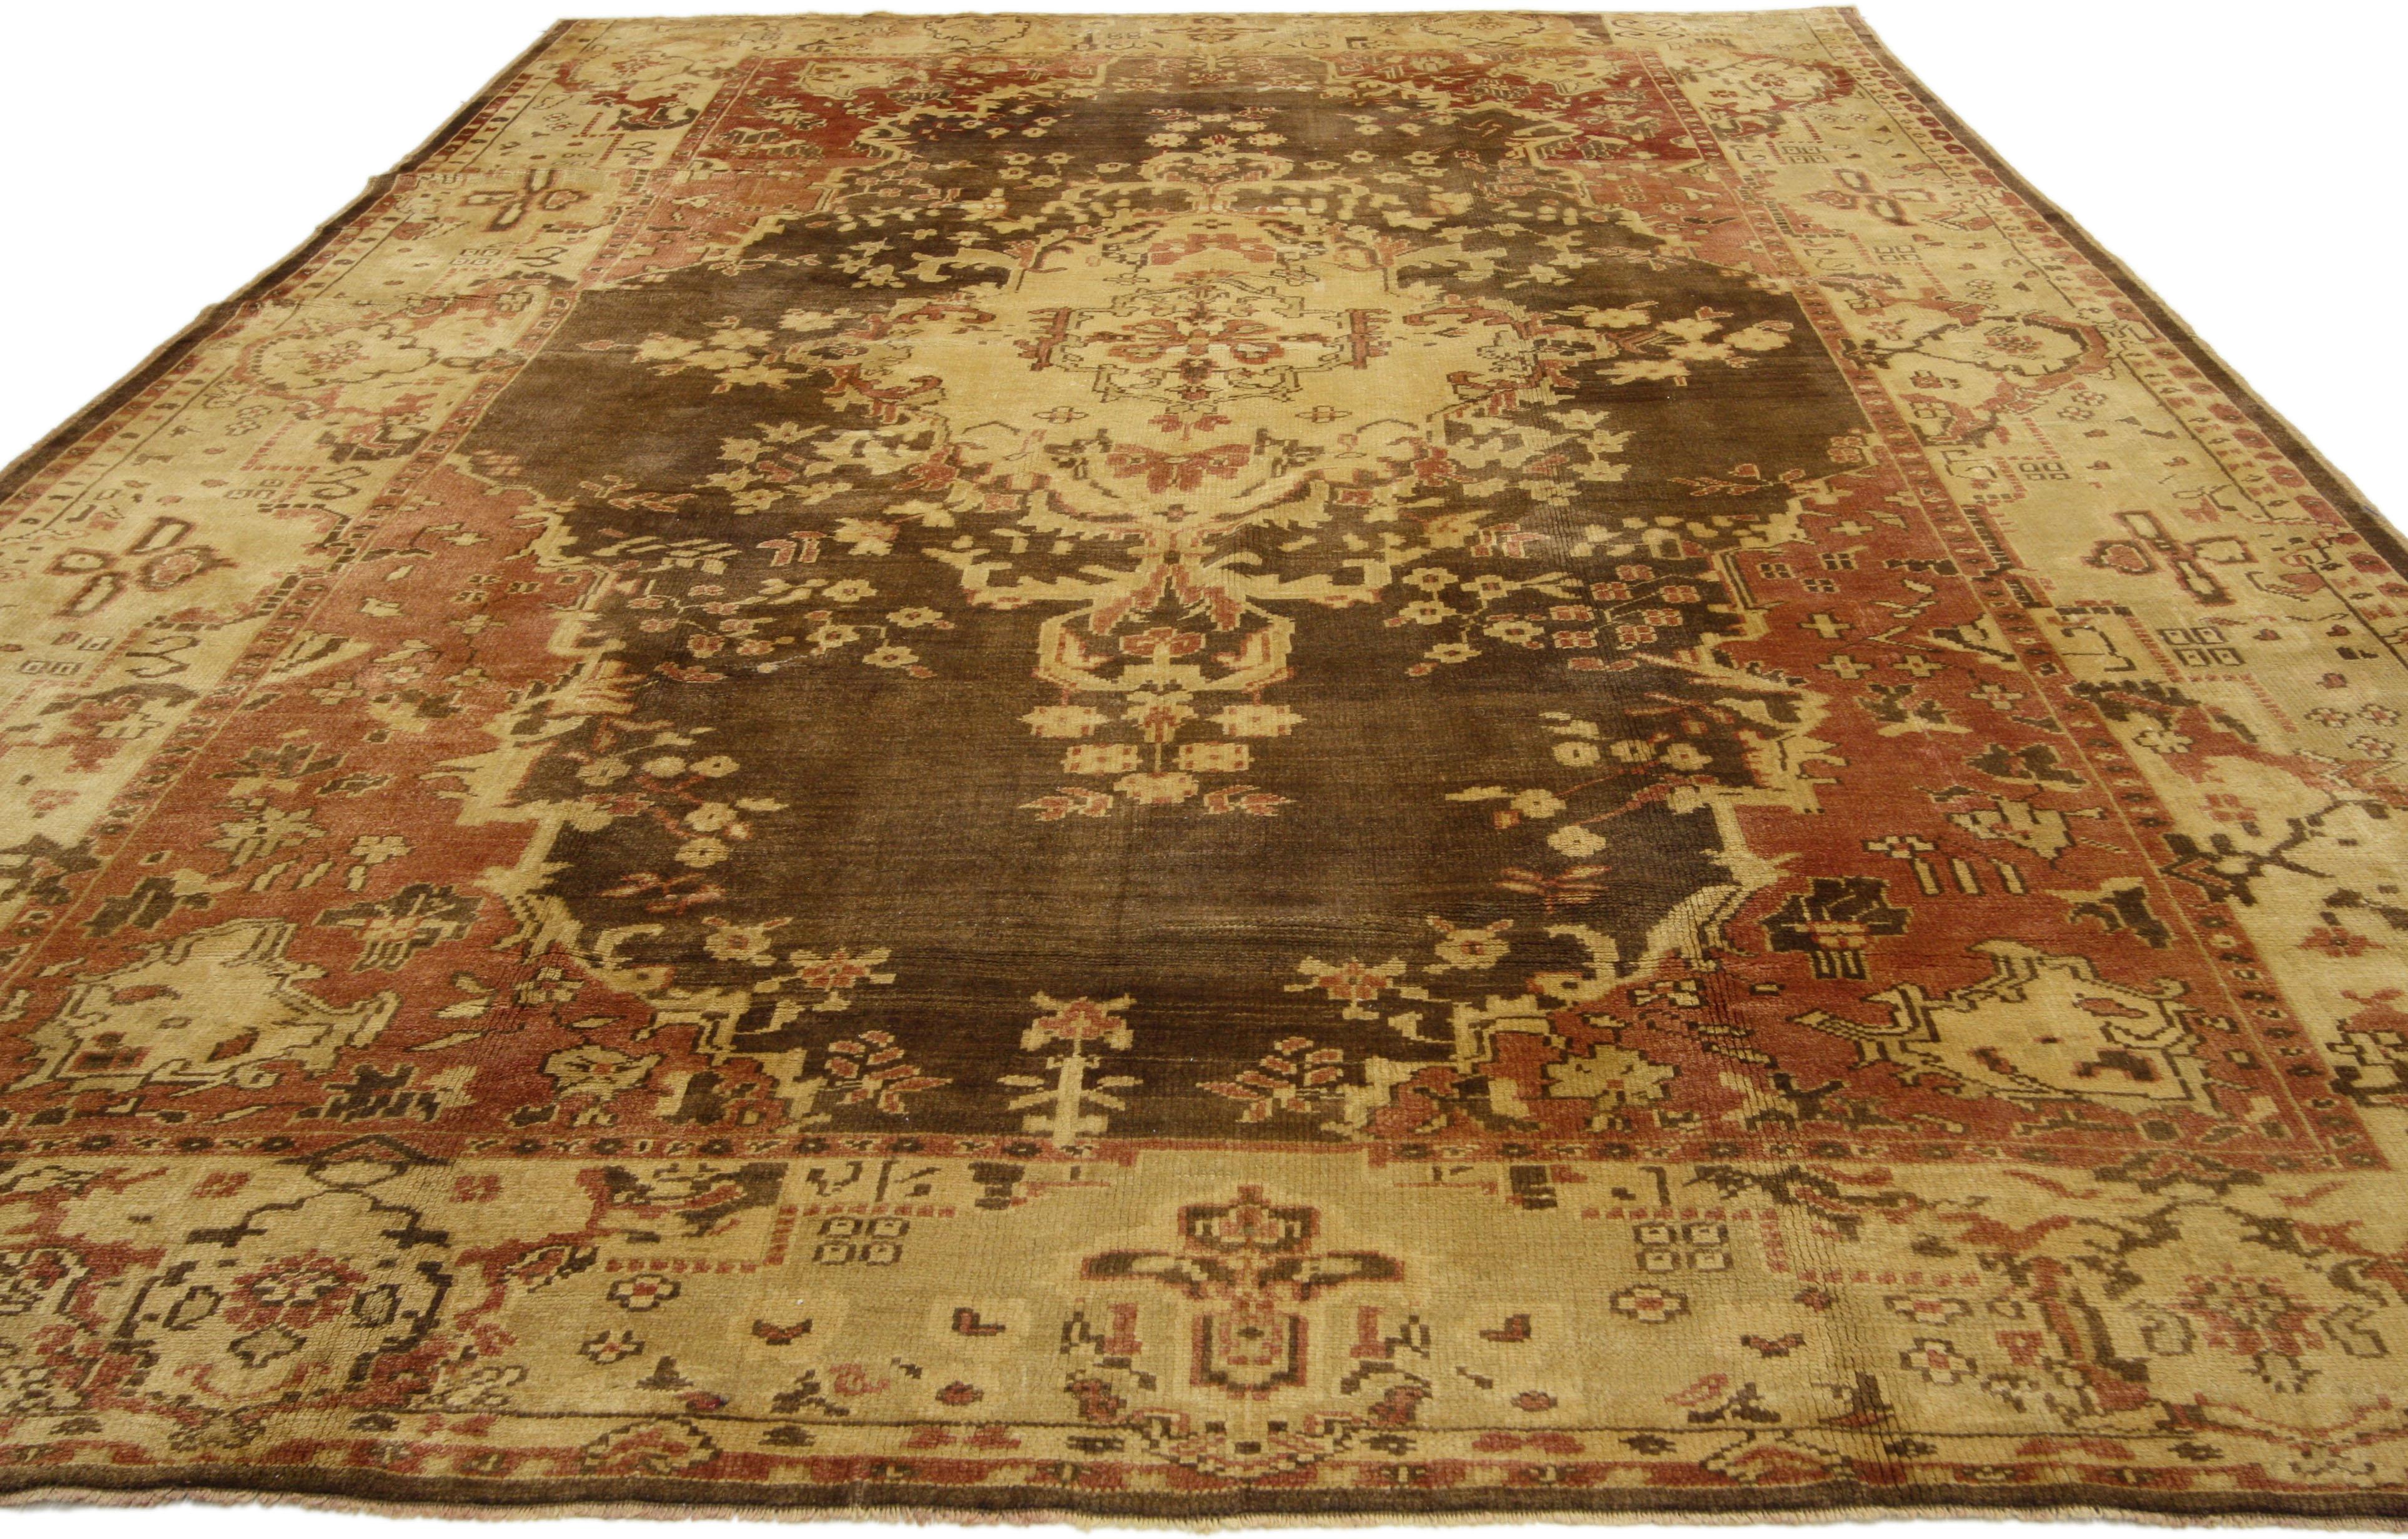 50561 Vintage Turkish Oushak rug with Rustic Arts & Crafts style. This hand knotted wool vintage Turkish Oushak rug features a large-scale medallion composed of leafy tendrils, delicate millefleurs, and roundel florals. The medallion floats in an